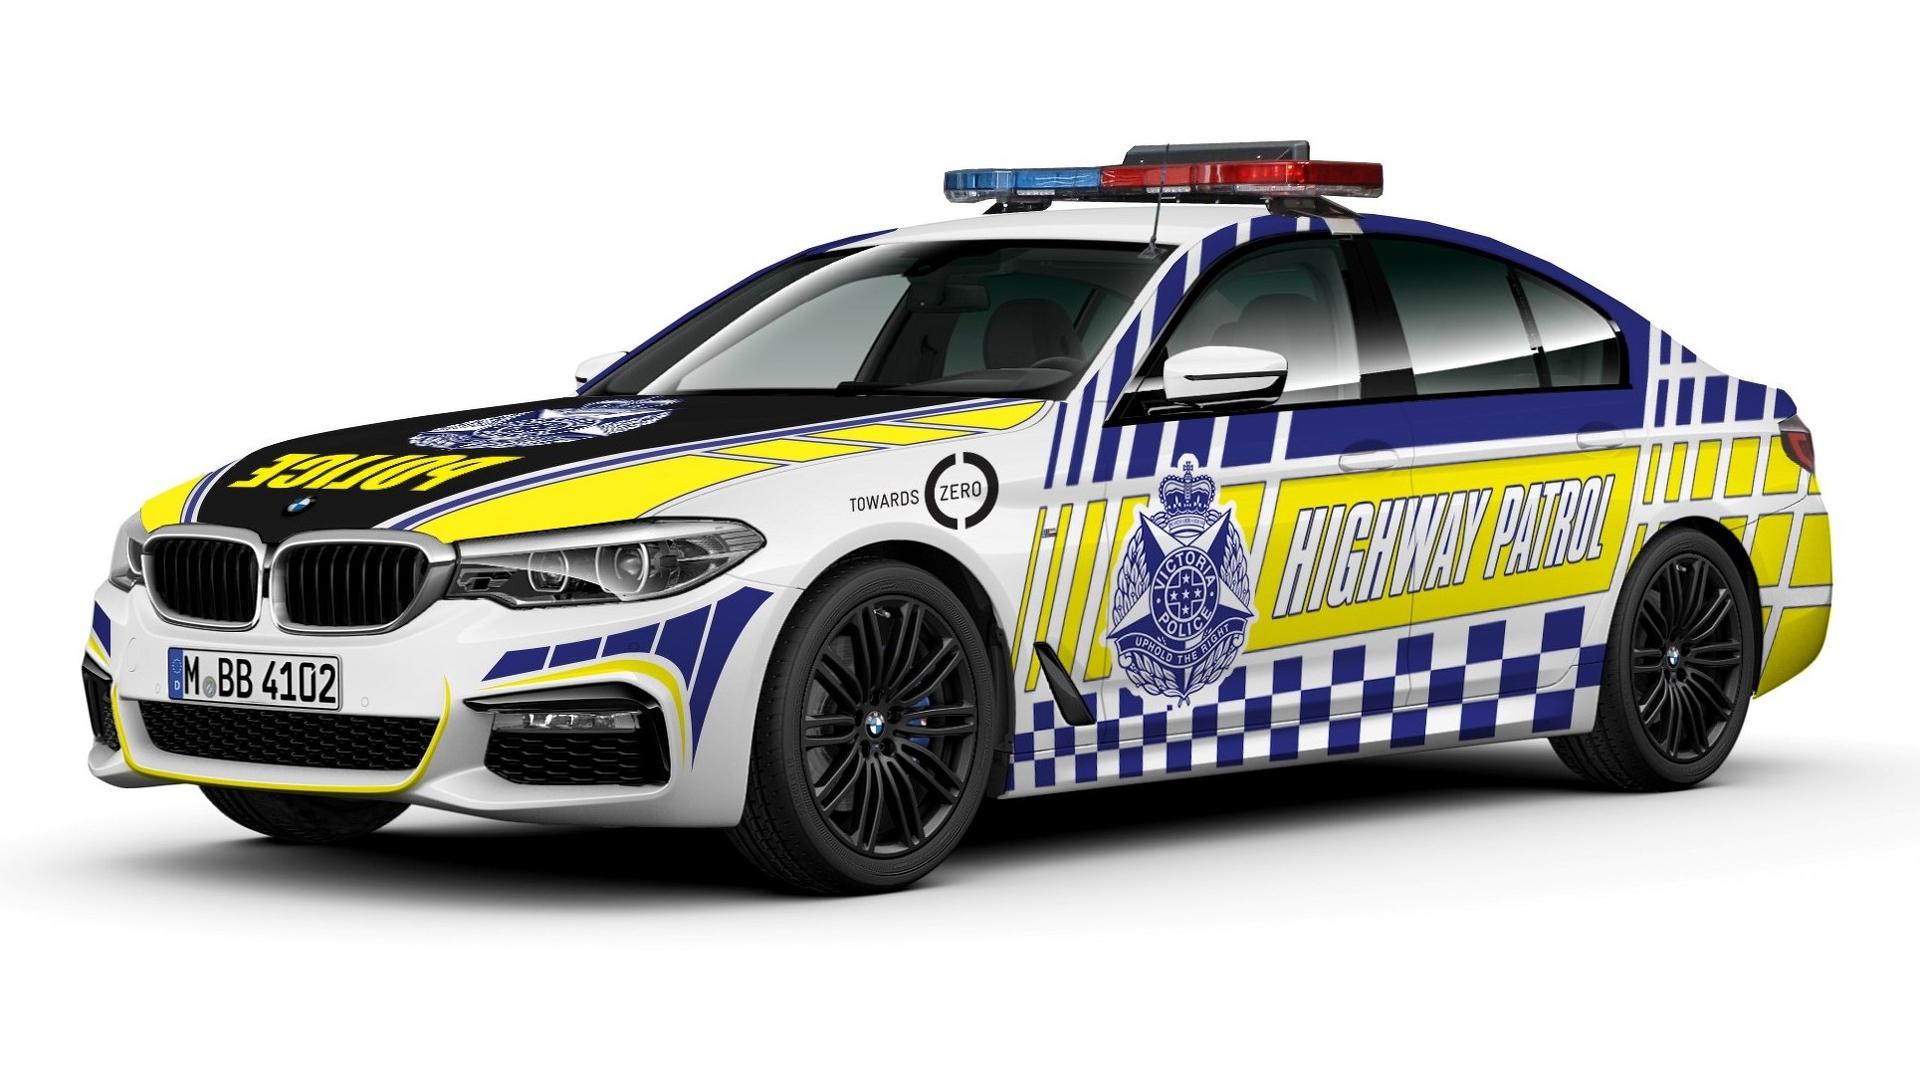 2017 BMW 530d Police Cars? Yes, in Victoria, Australia 